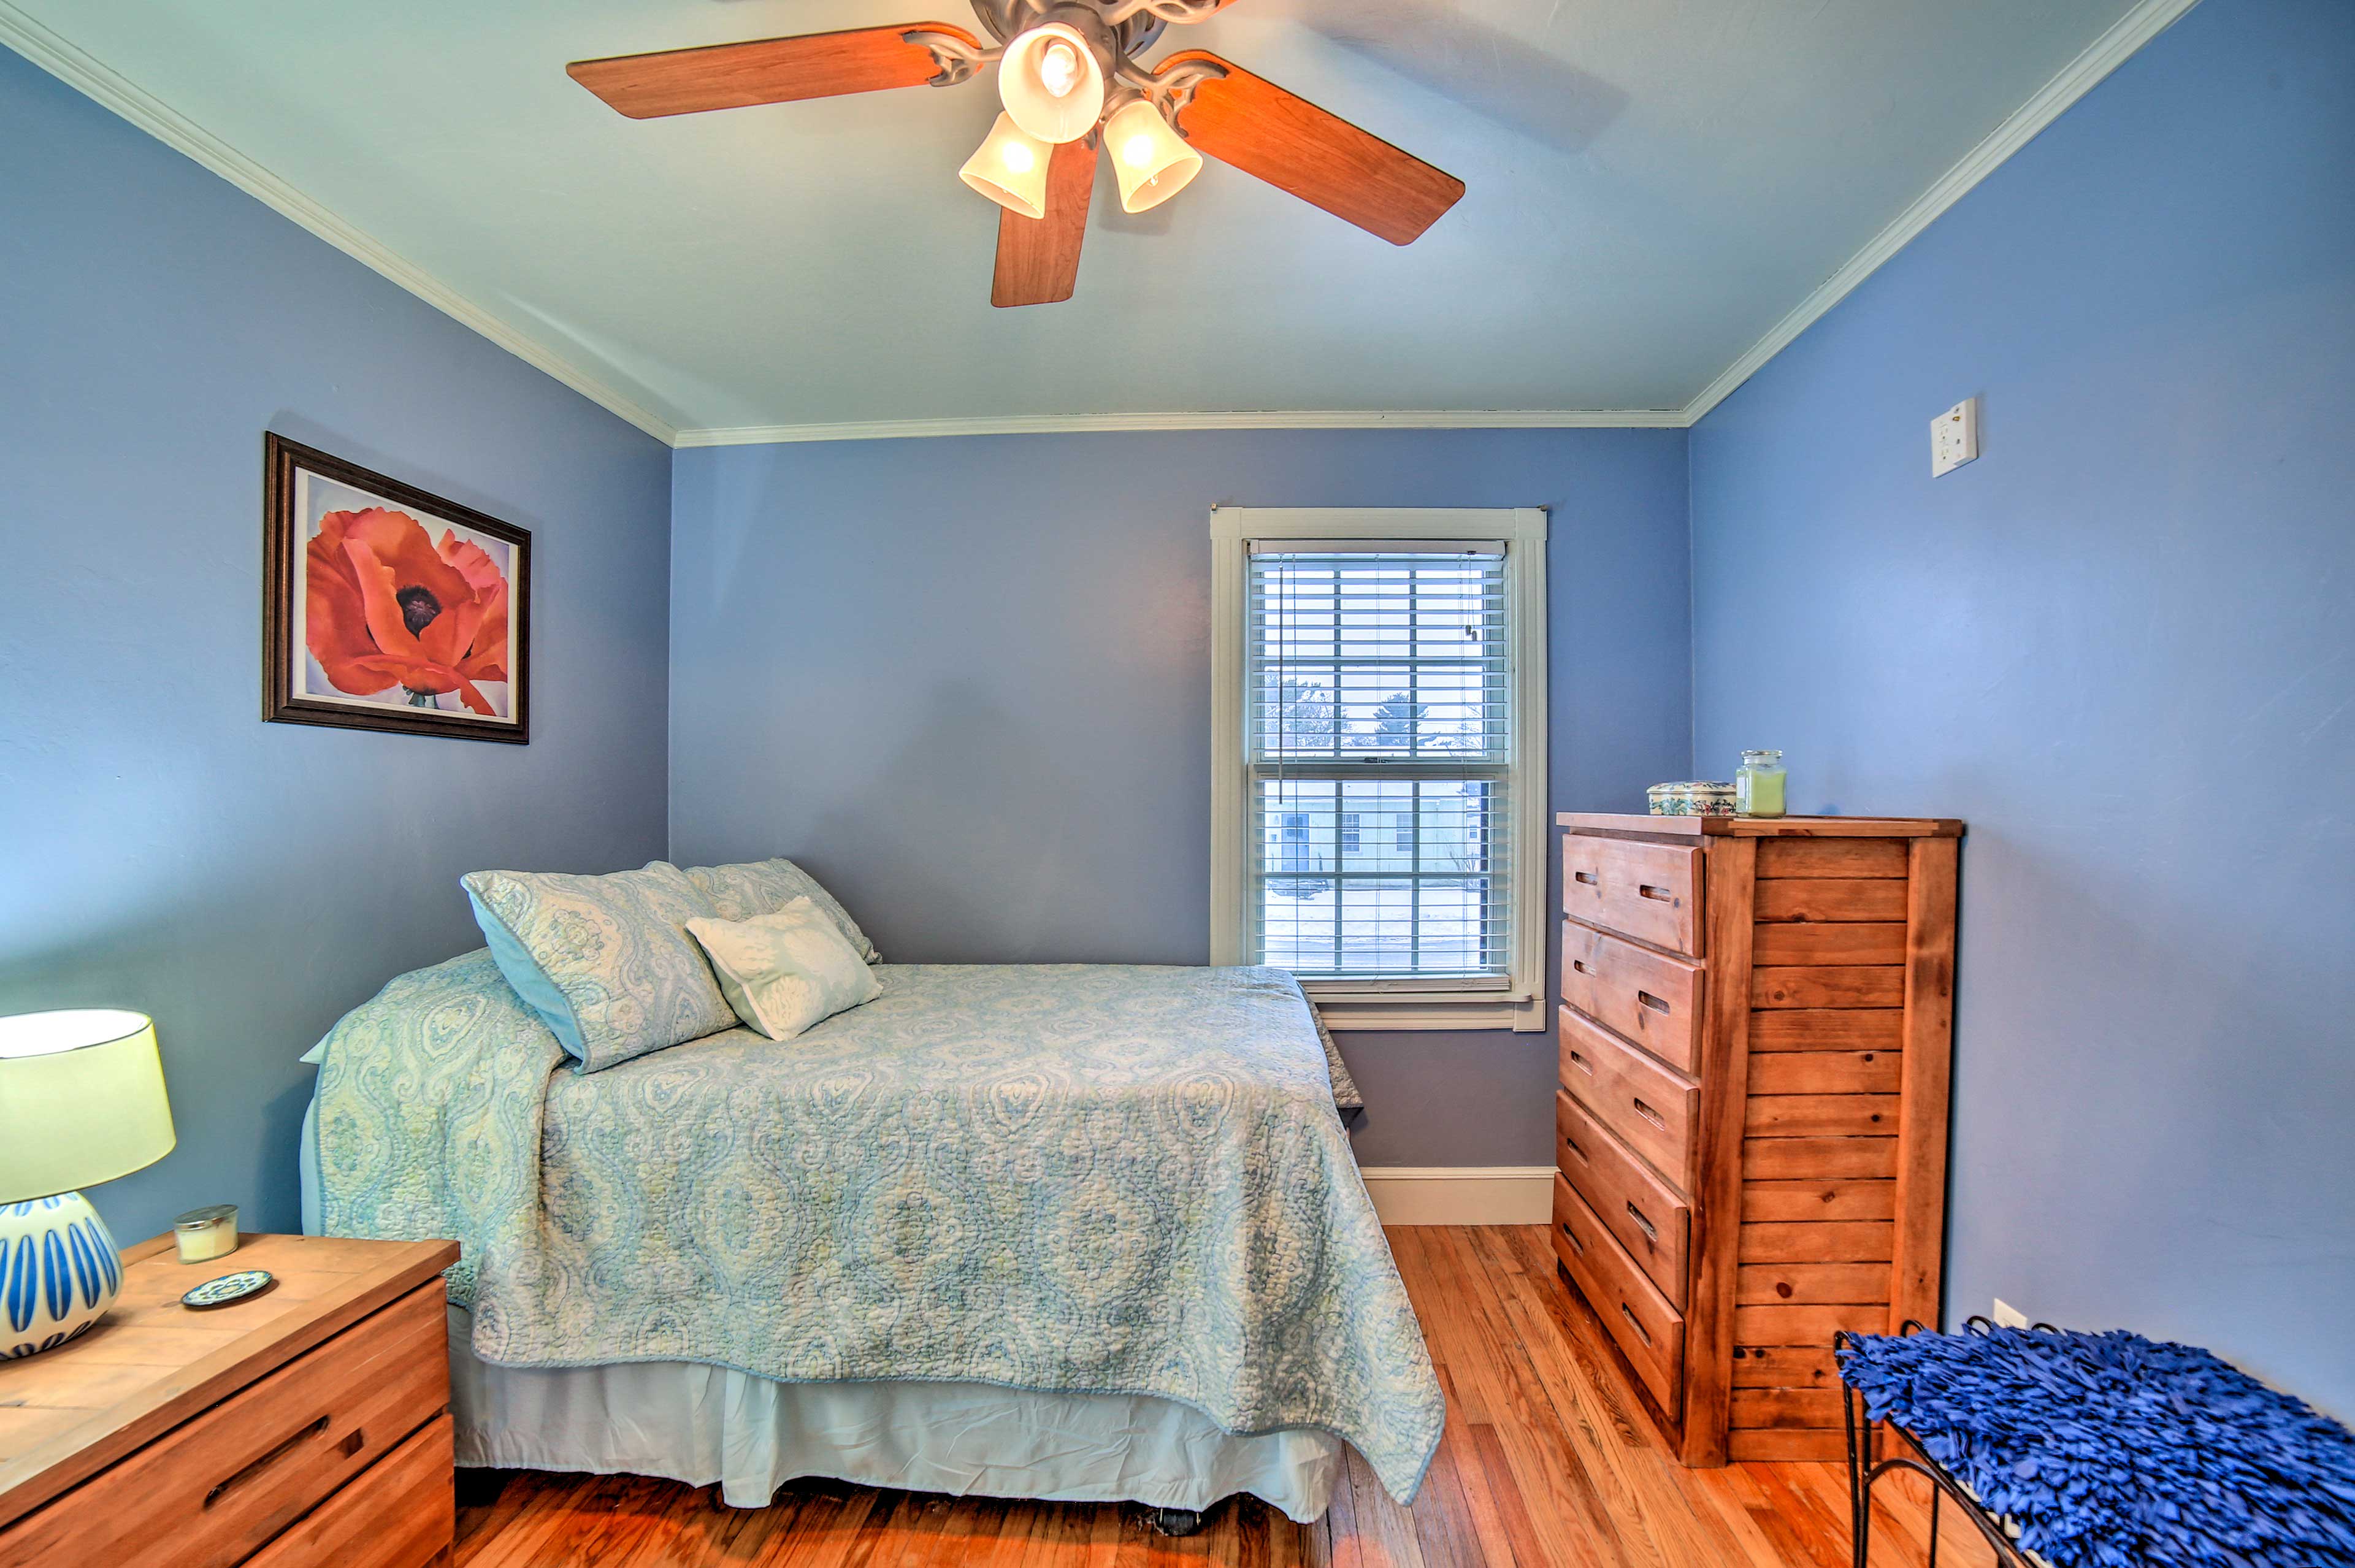 The master bedroom offers a full bed for 2.